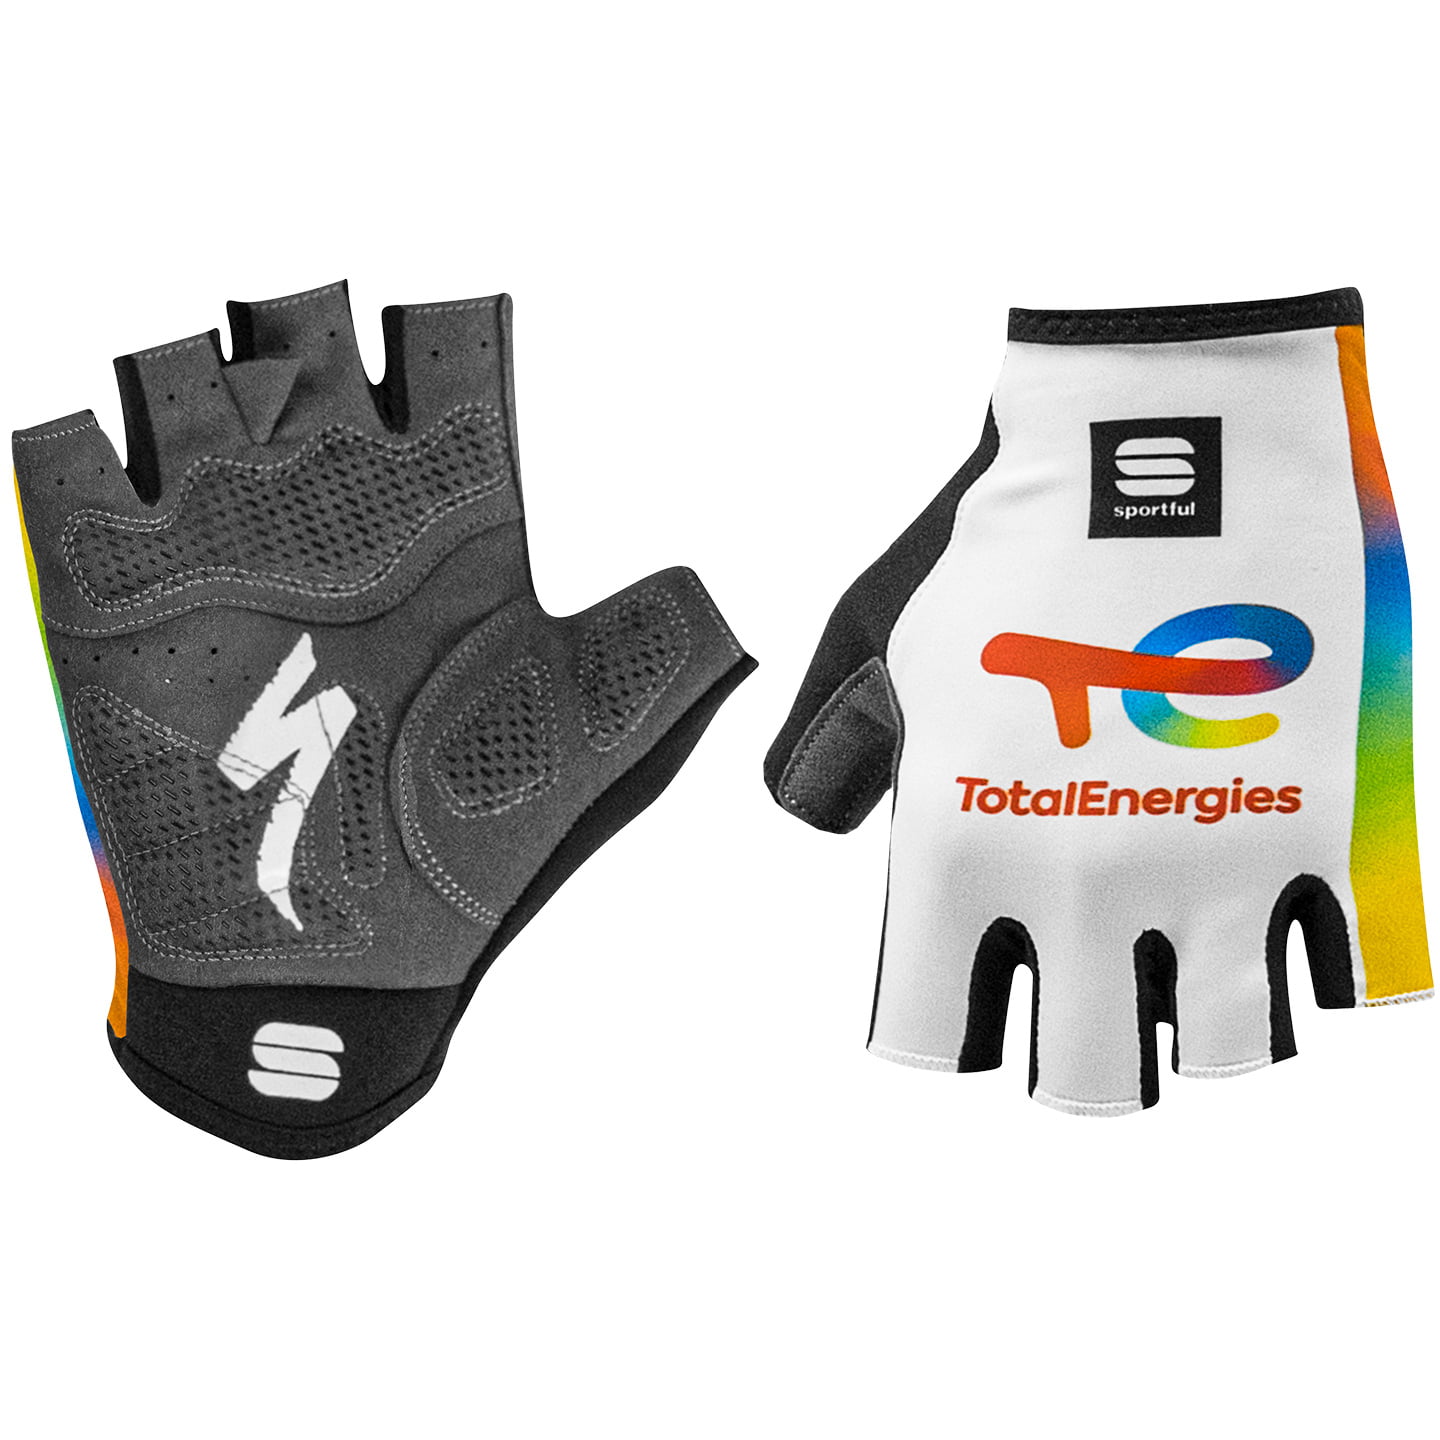 TEAM TOTALENERGIES 2023 Cycling Gloves, for men, size L, Cycling gloves, Bike gear